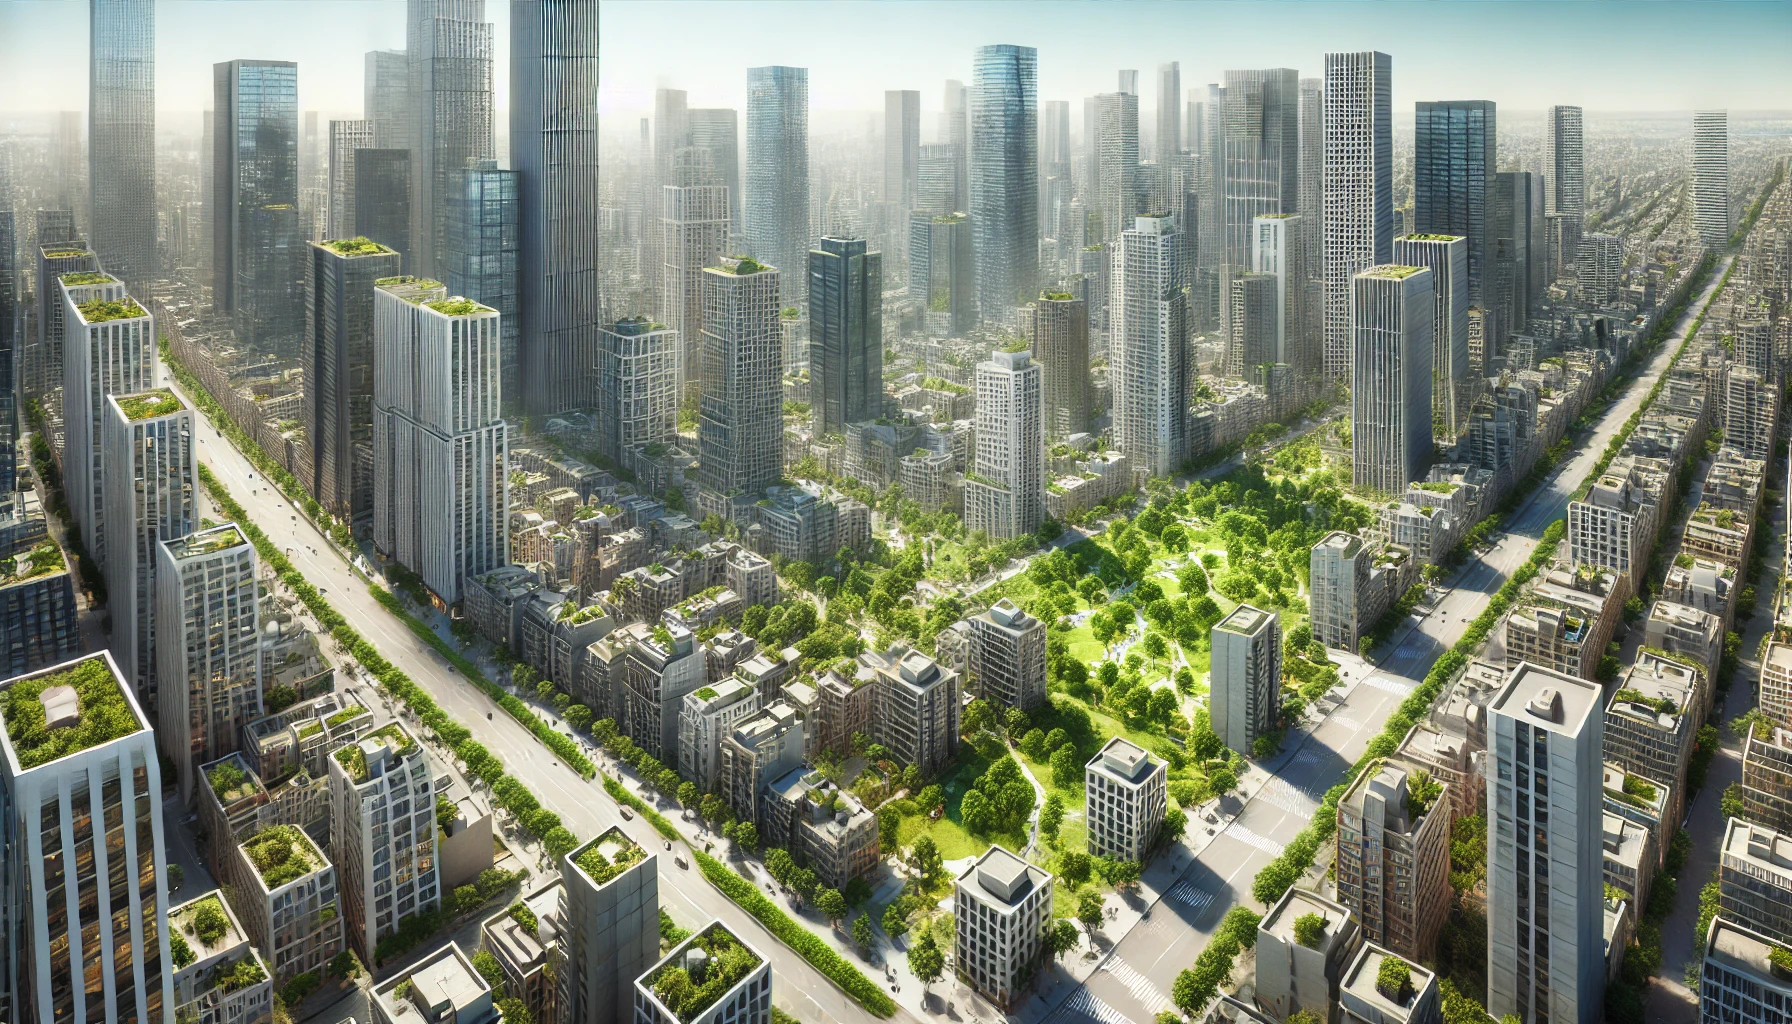 Transforming Urban Landscapes: How Tall Buildings and Strategic Green Space Placement Reduce City Temperatures